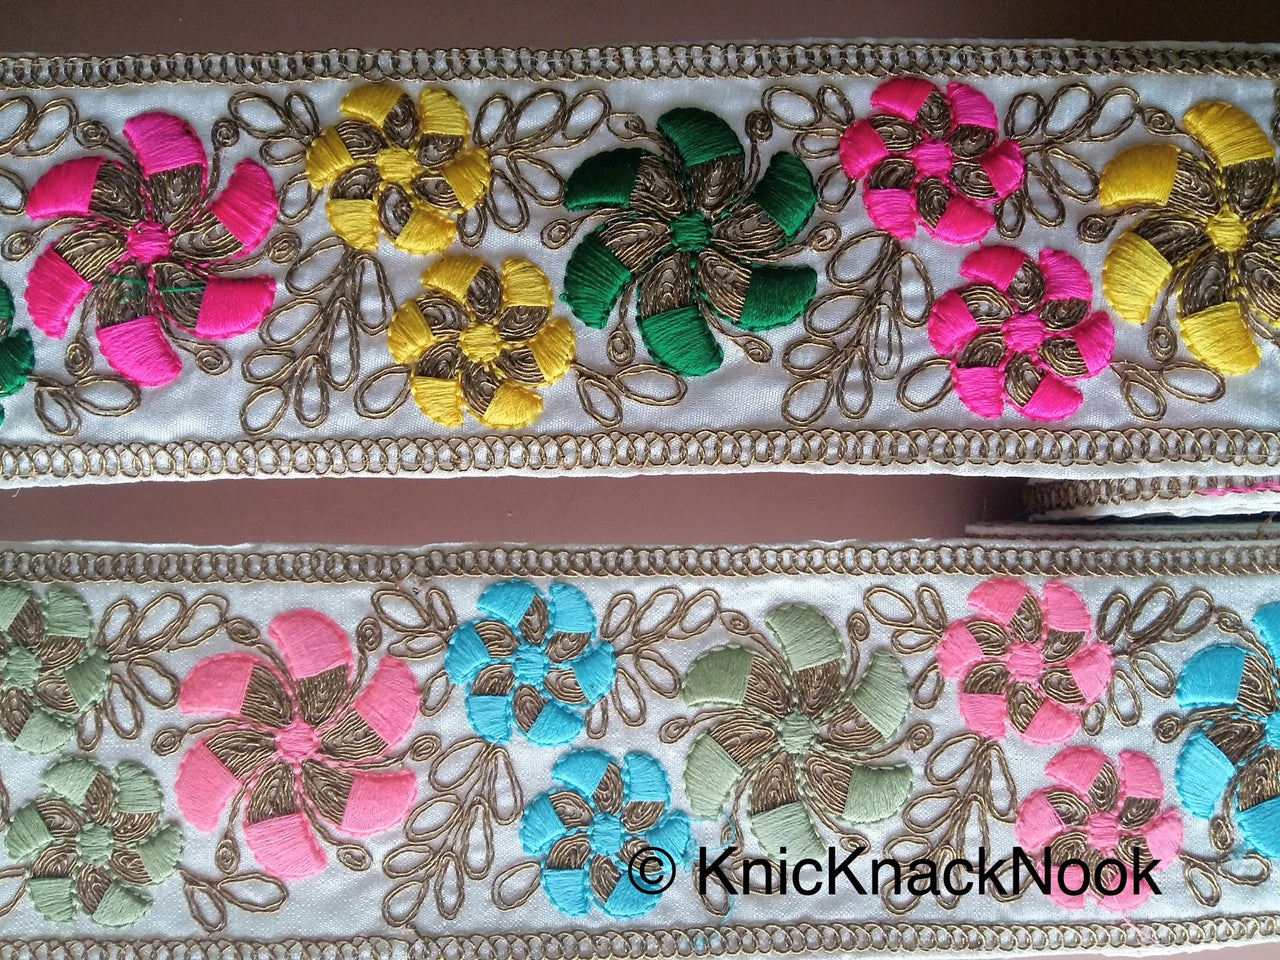 Off White Fabric Trim With Bronze, Green, Pink And Blue/Yellow Floral Embroidery